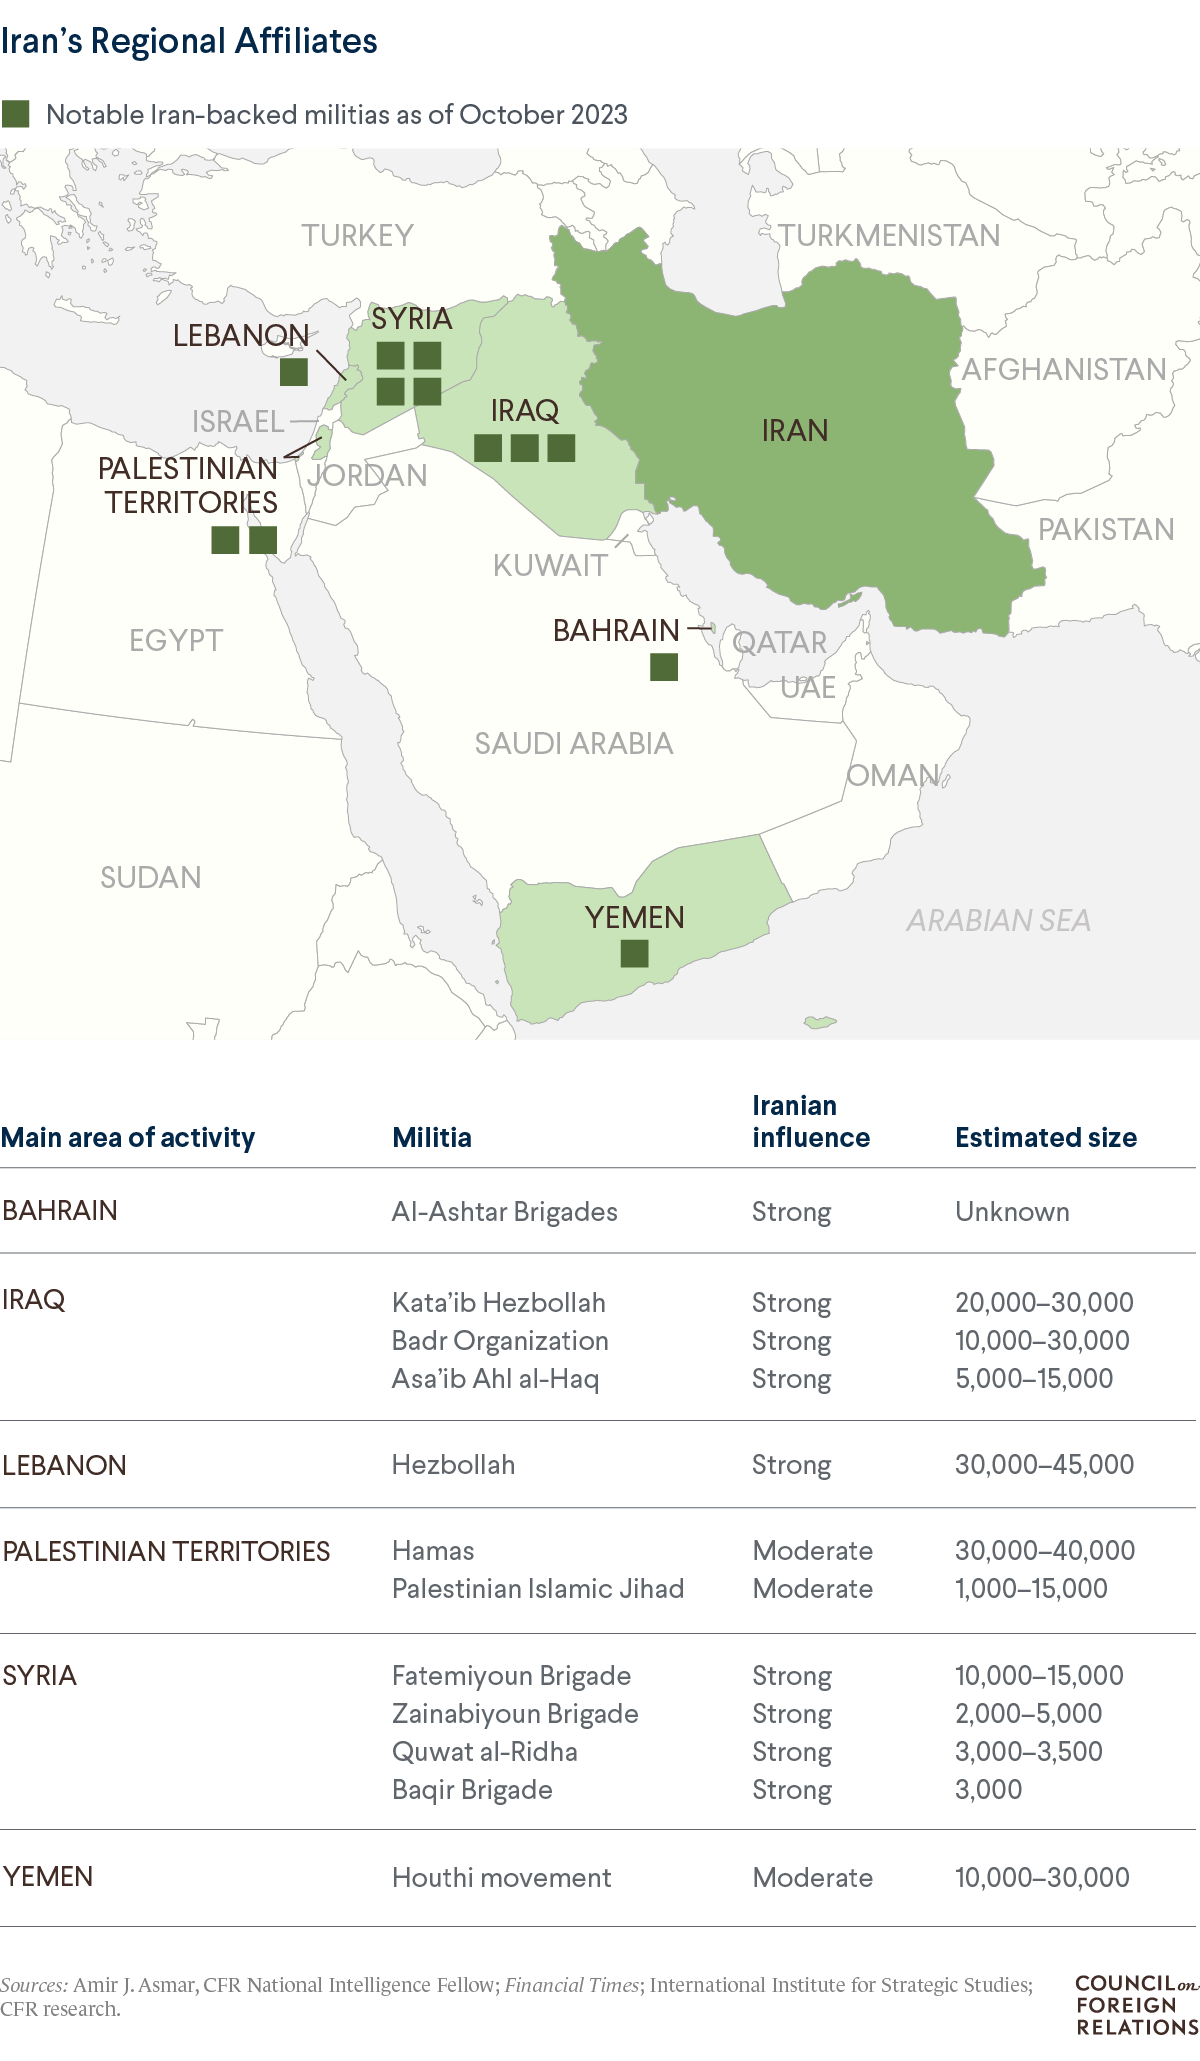 A map of the Middle East showing Iran-backed militias in Syria, Iraq, and other countries